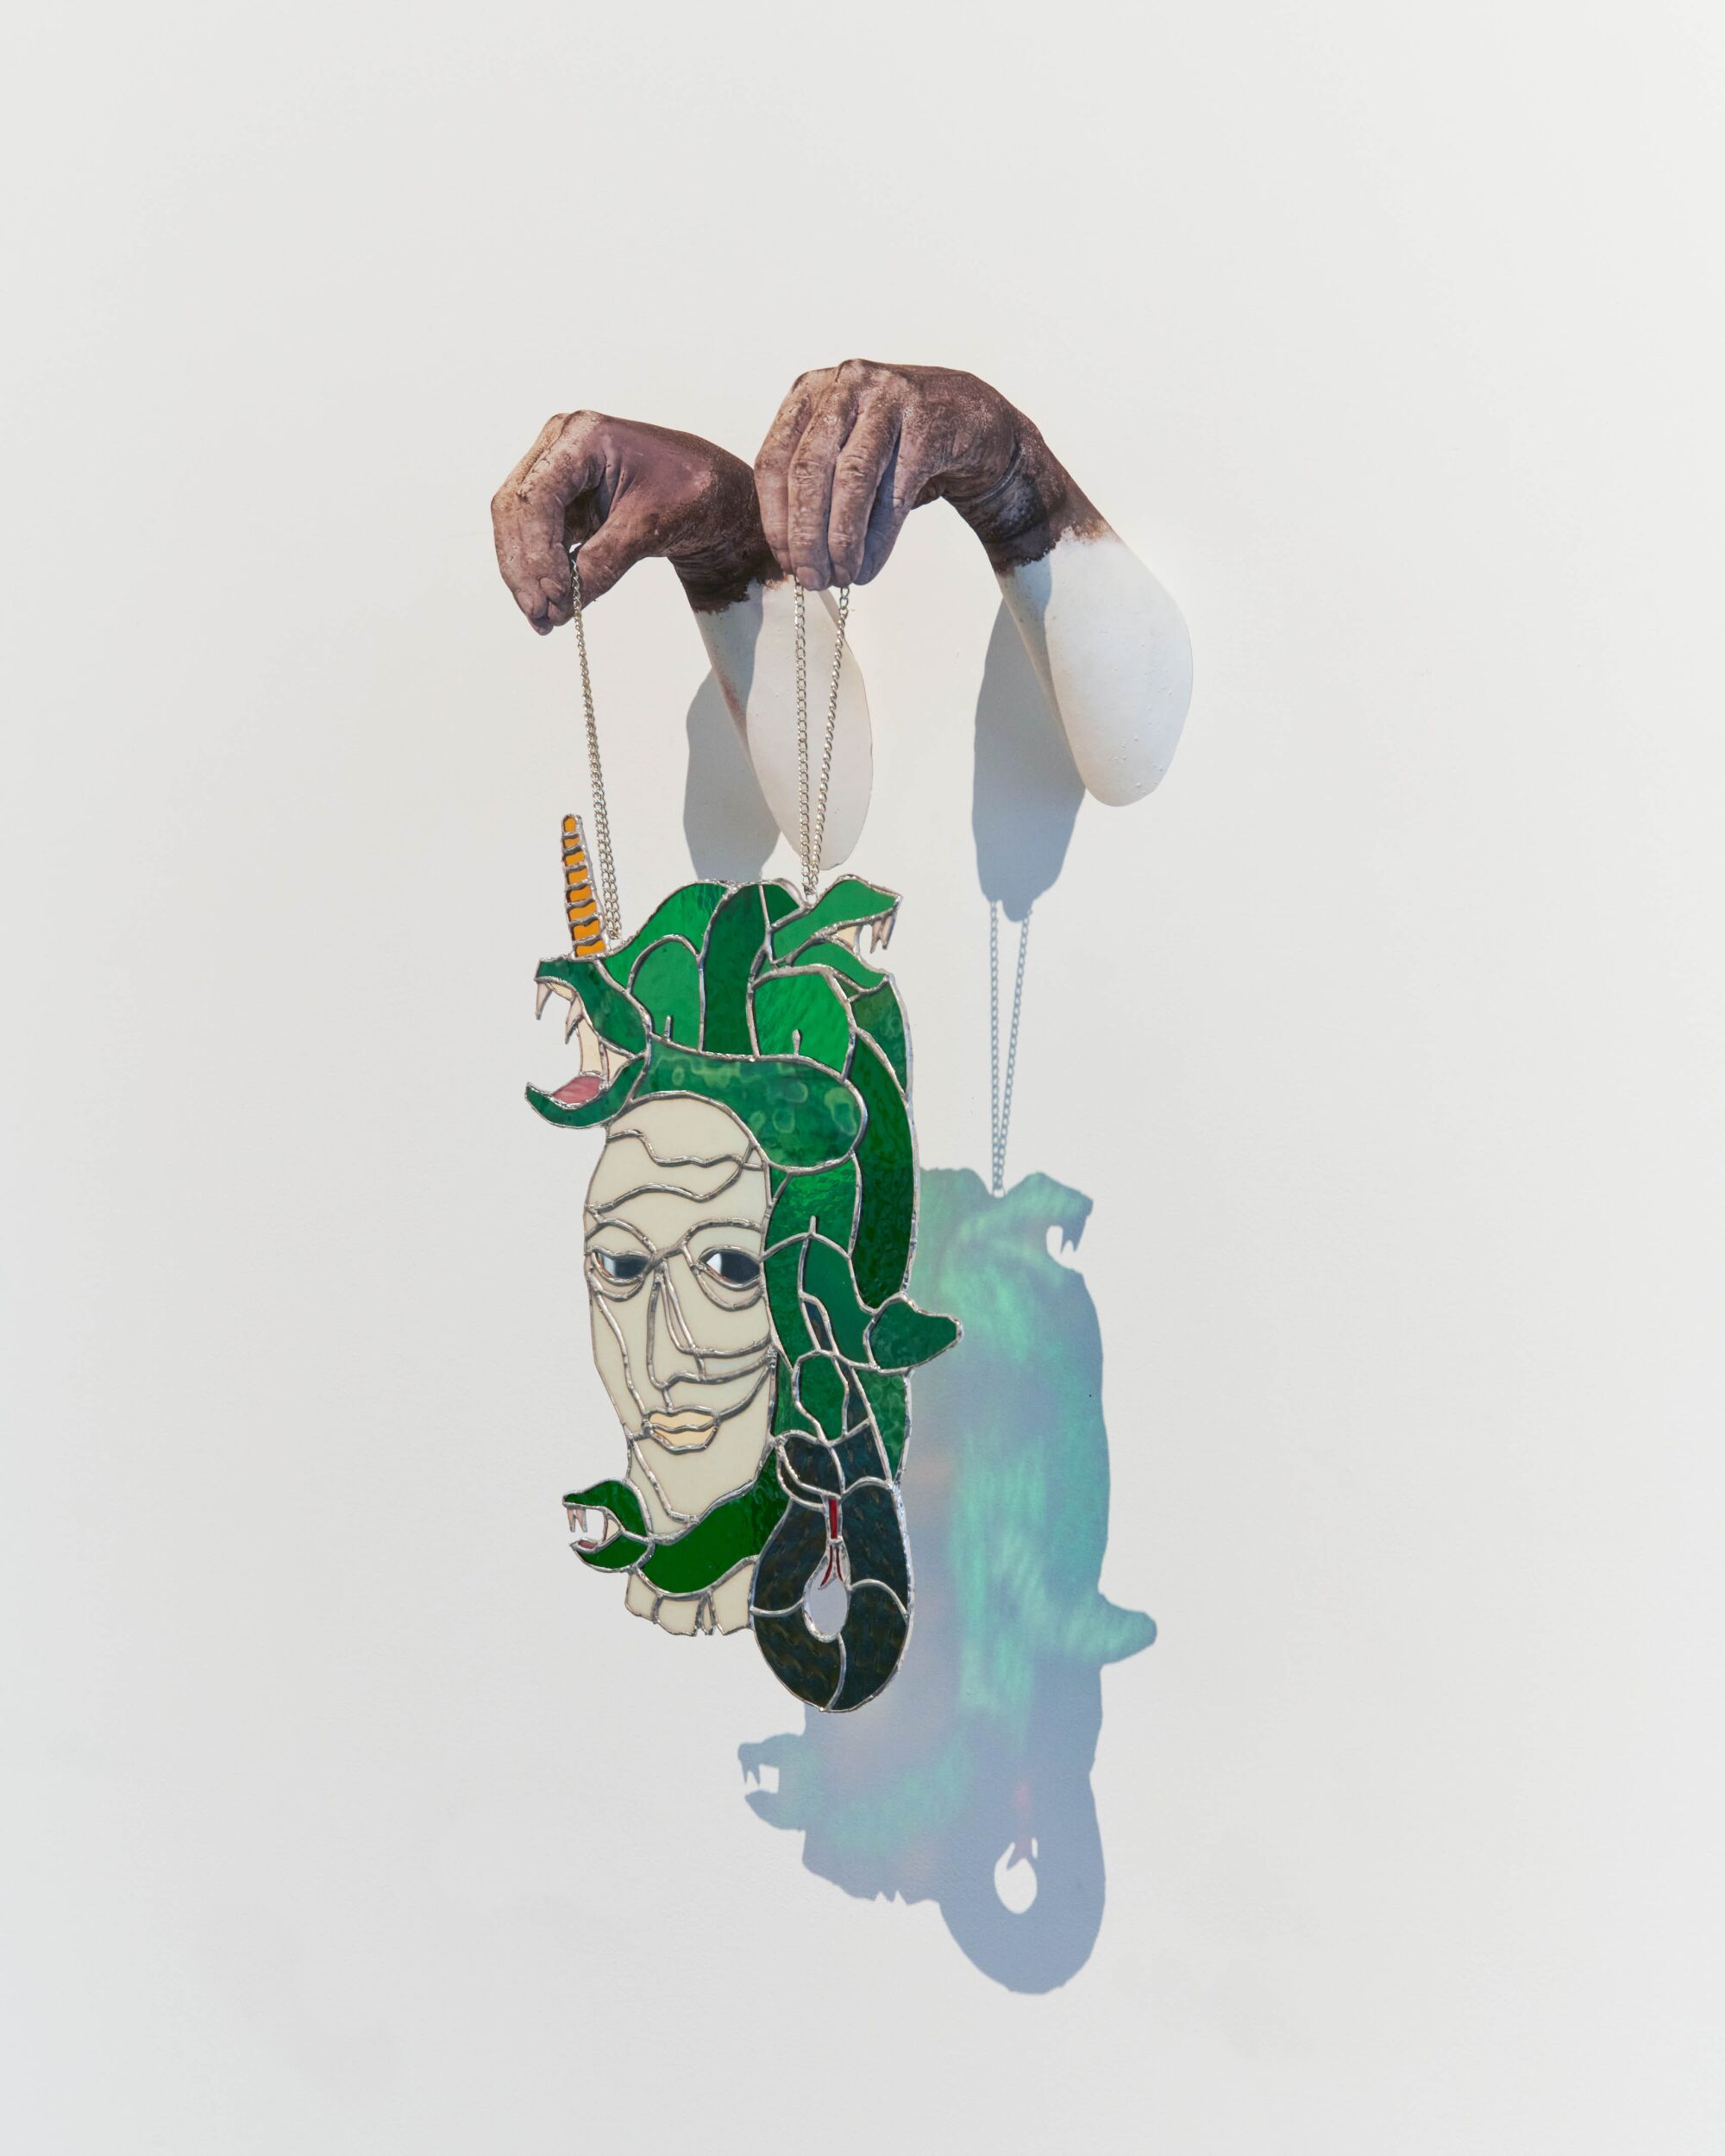 Timo Fahler alter ego series - Medusa, 2021 plaster, stained glass, mirror, dye, chain, twine 24"H x 14"W x 10"D